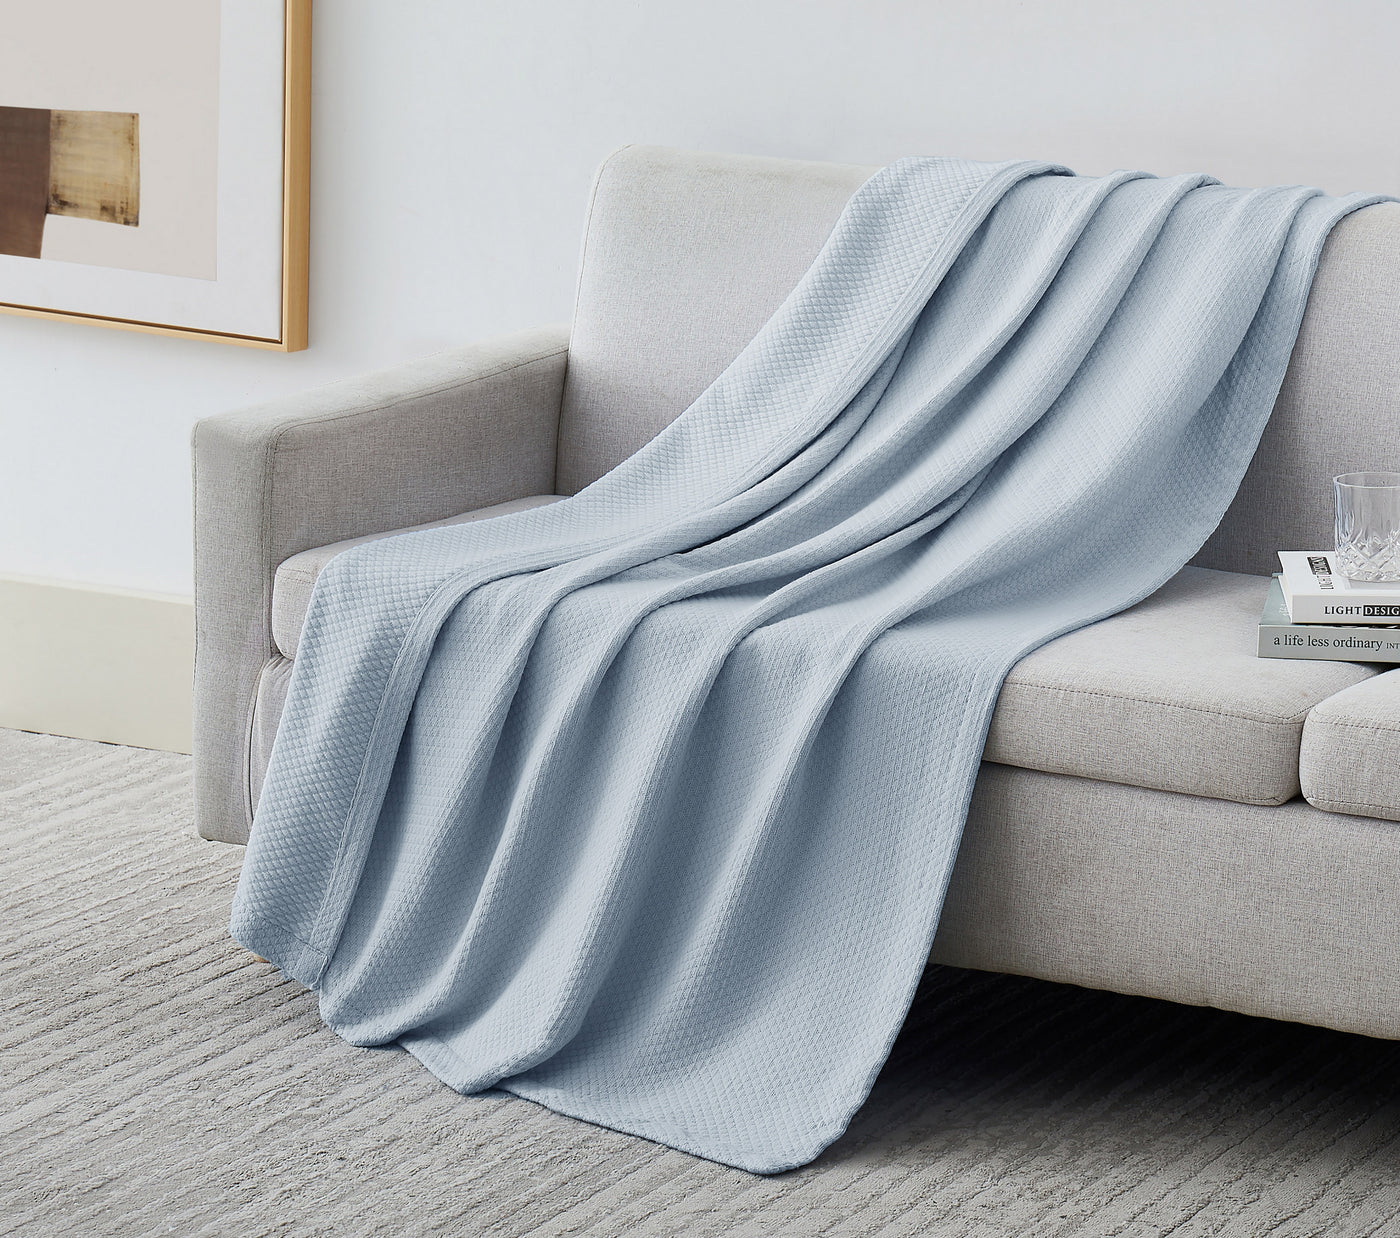 Cotton Premium Blankets and Throws